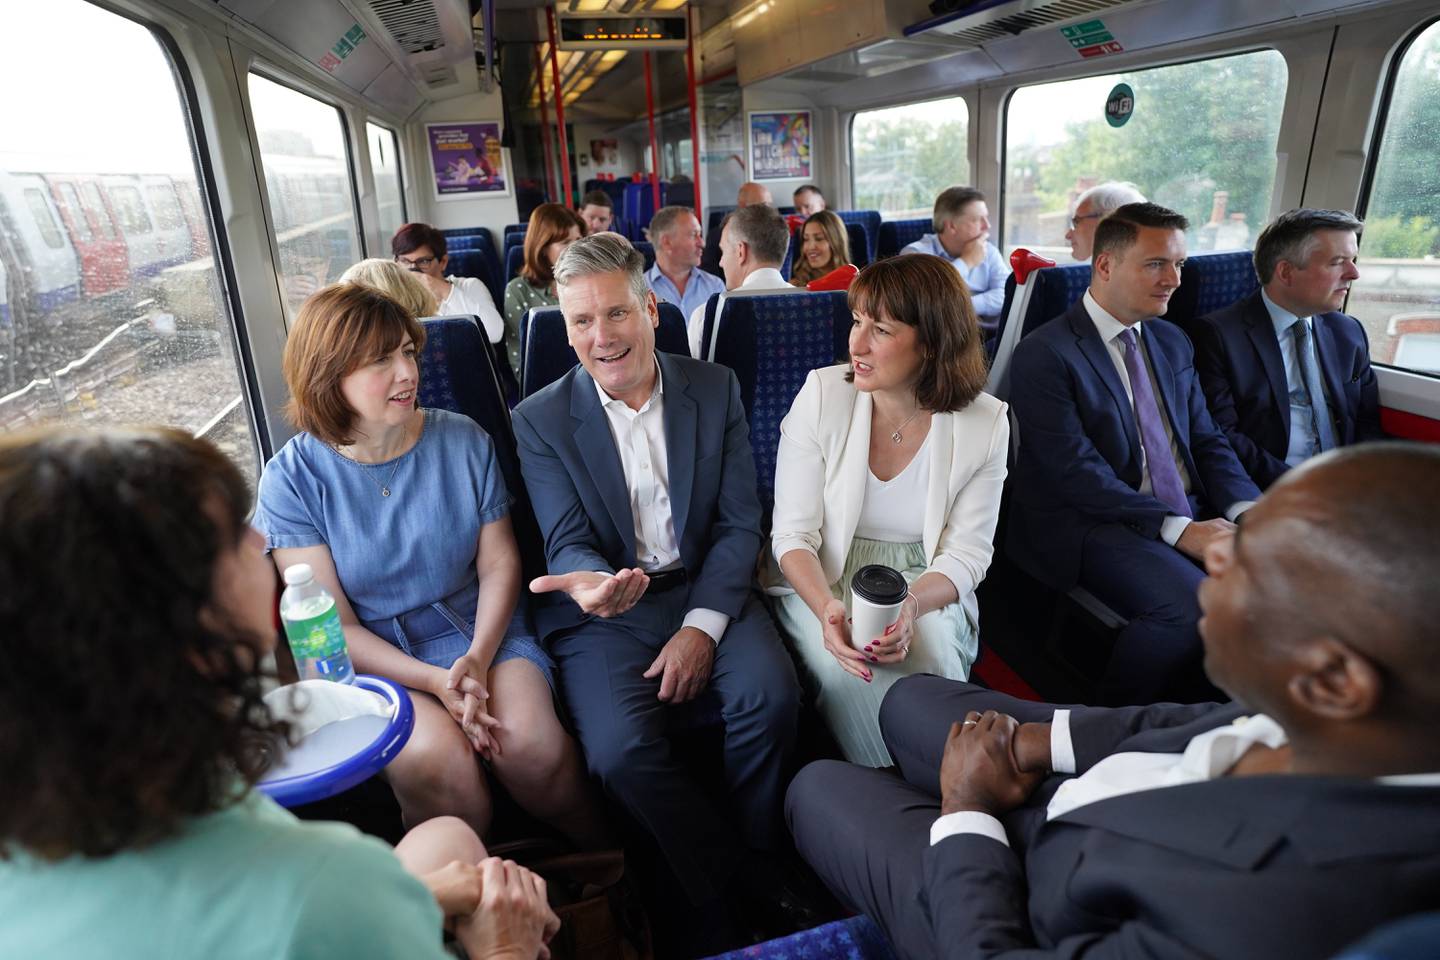 Labour leader Keir Starmer travels by train with members of his shadow cabinet to High Wycombe, Buckinghamshire, to hold a shadow cabinet meeting. PA